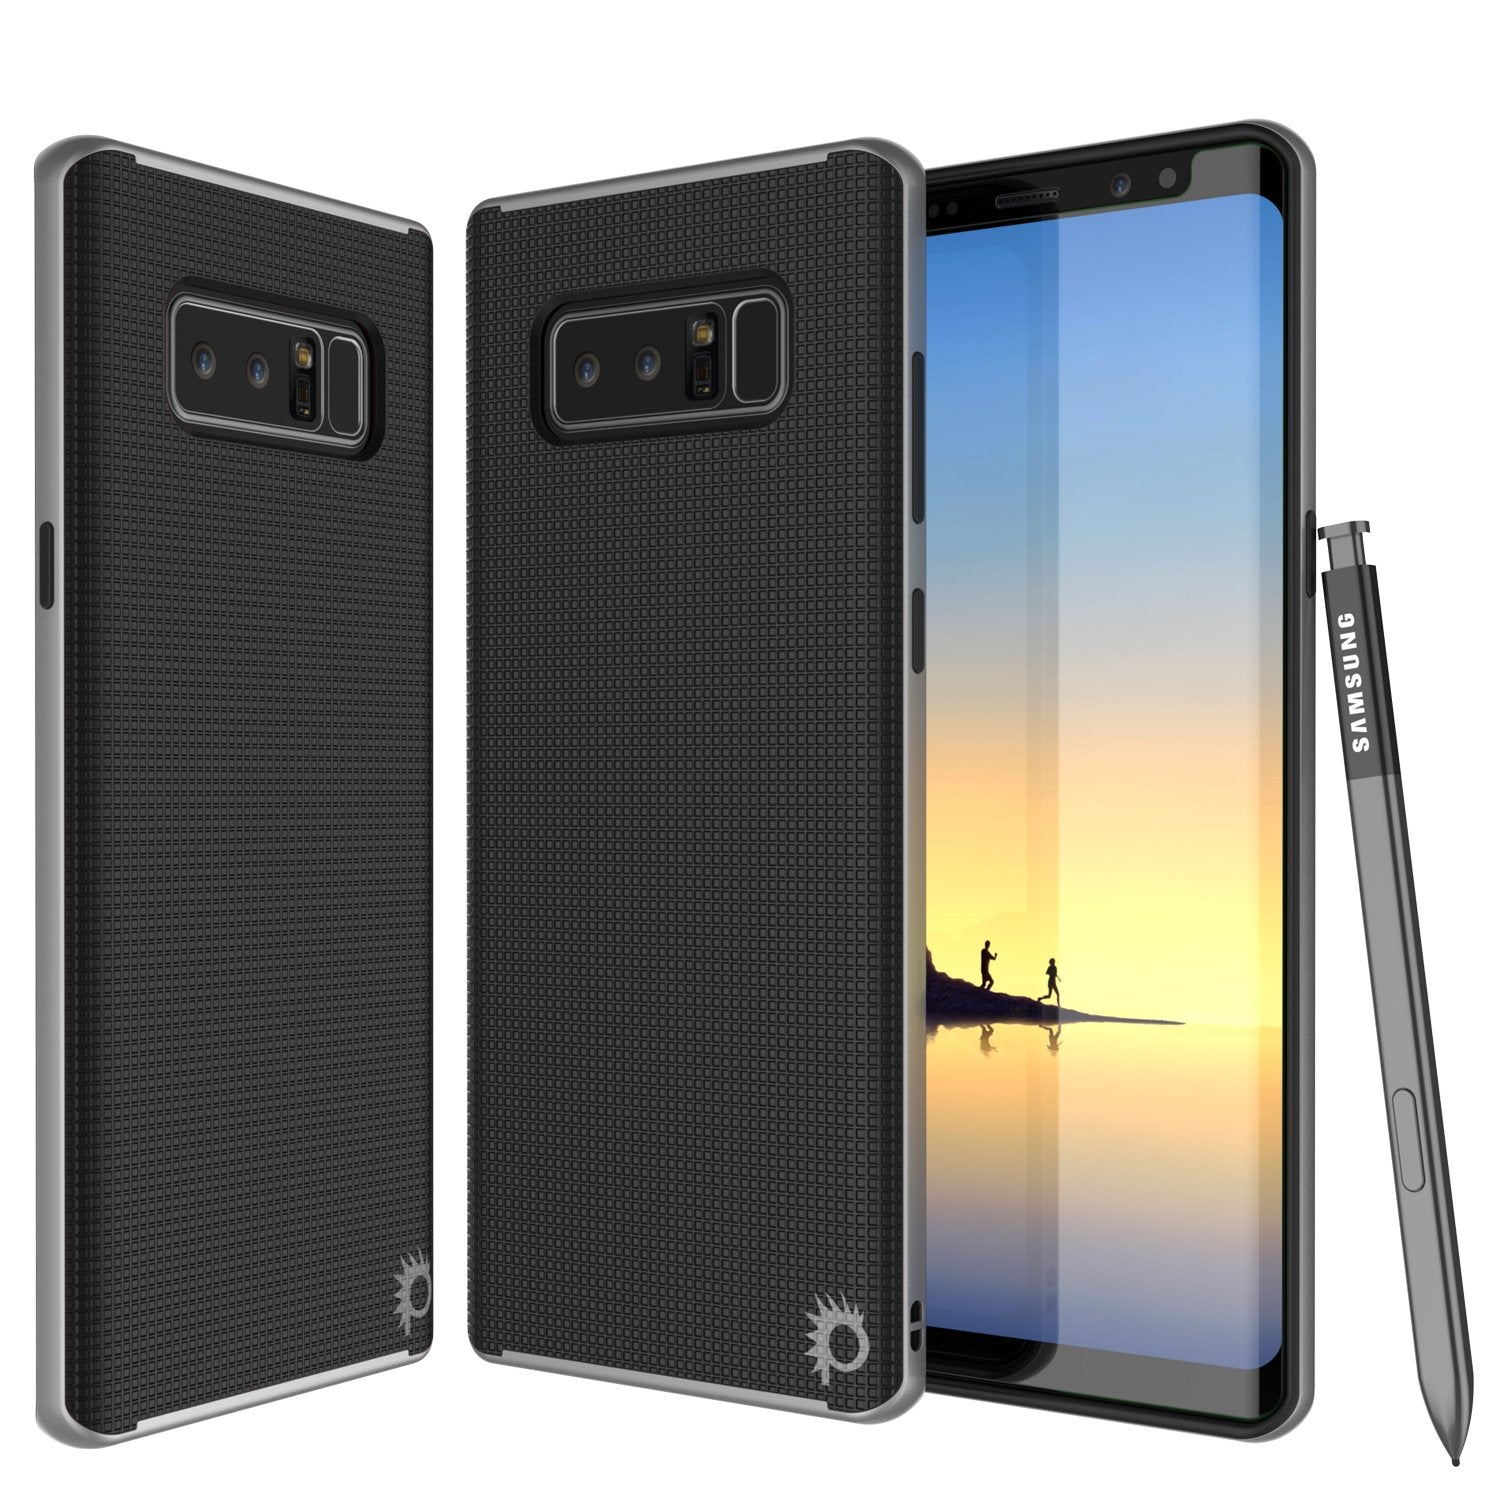 Galaxy Note 8 Case, PunkCase [Stealth Series] Hybrid 3-Piece Shockproof Dual Layer Cover [Non-Slip] [Soft TPU + PC Bumper] with PUNKSHIELD Screen Protector for Samsung Note 8 [Silver]